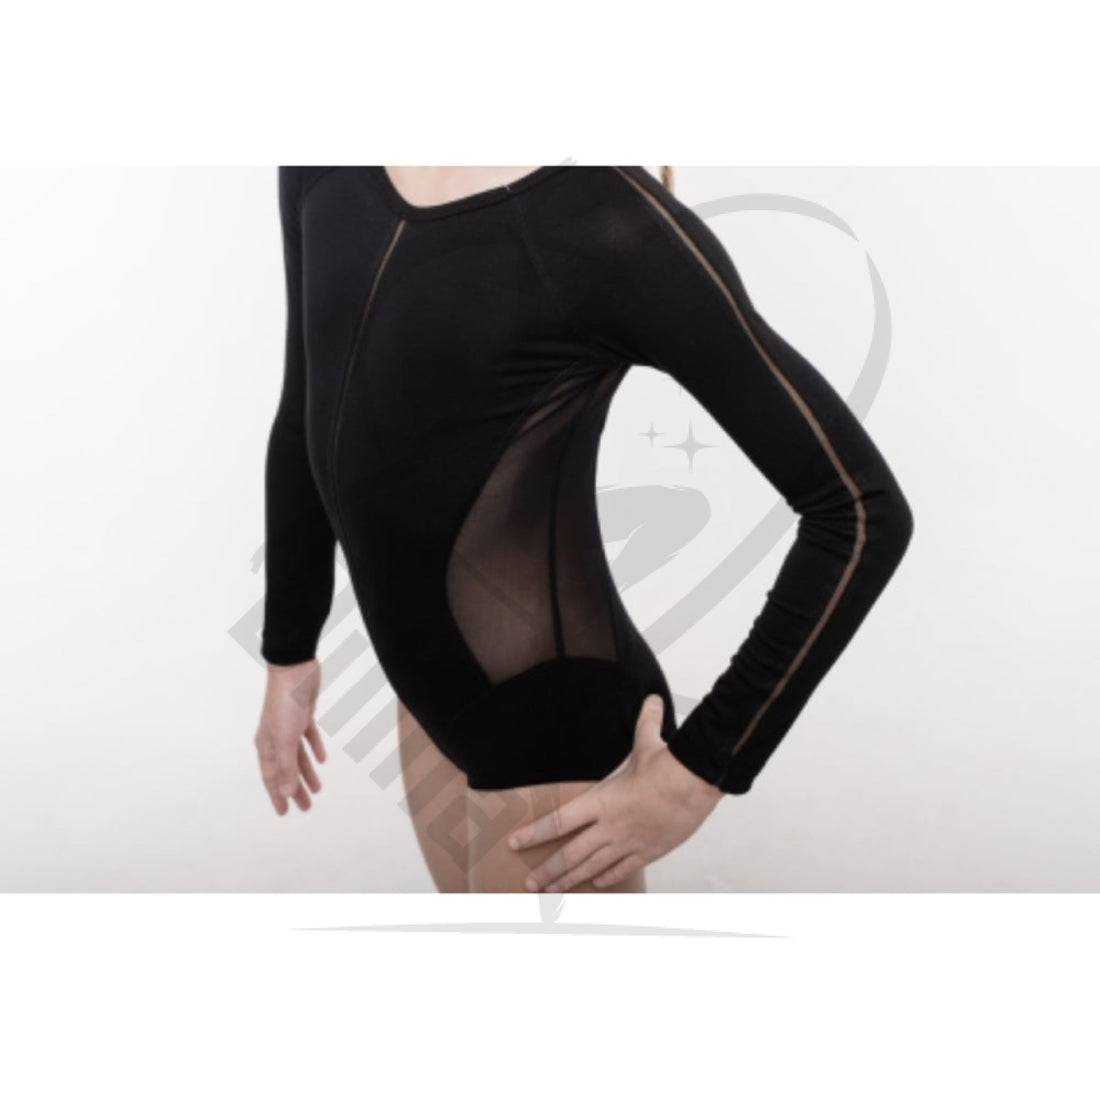 Grase Long Sleeve Black Leotard With Knitted Fabric Sleeves Leotards